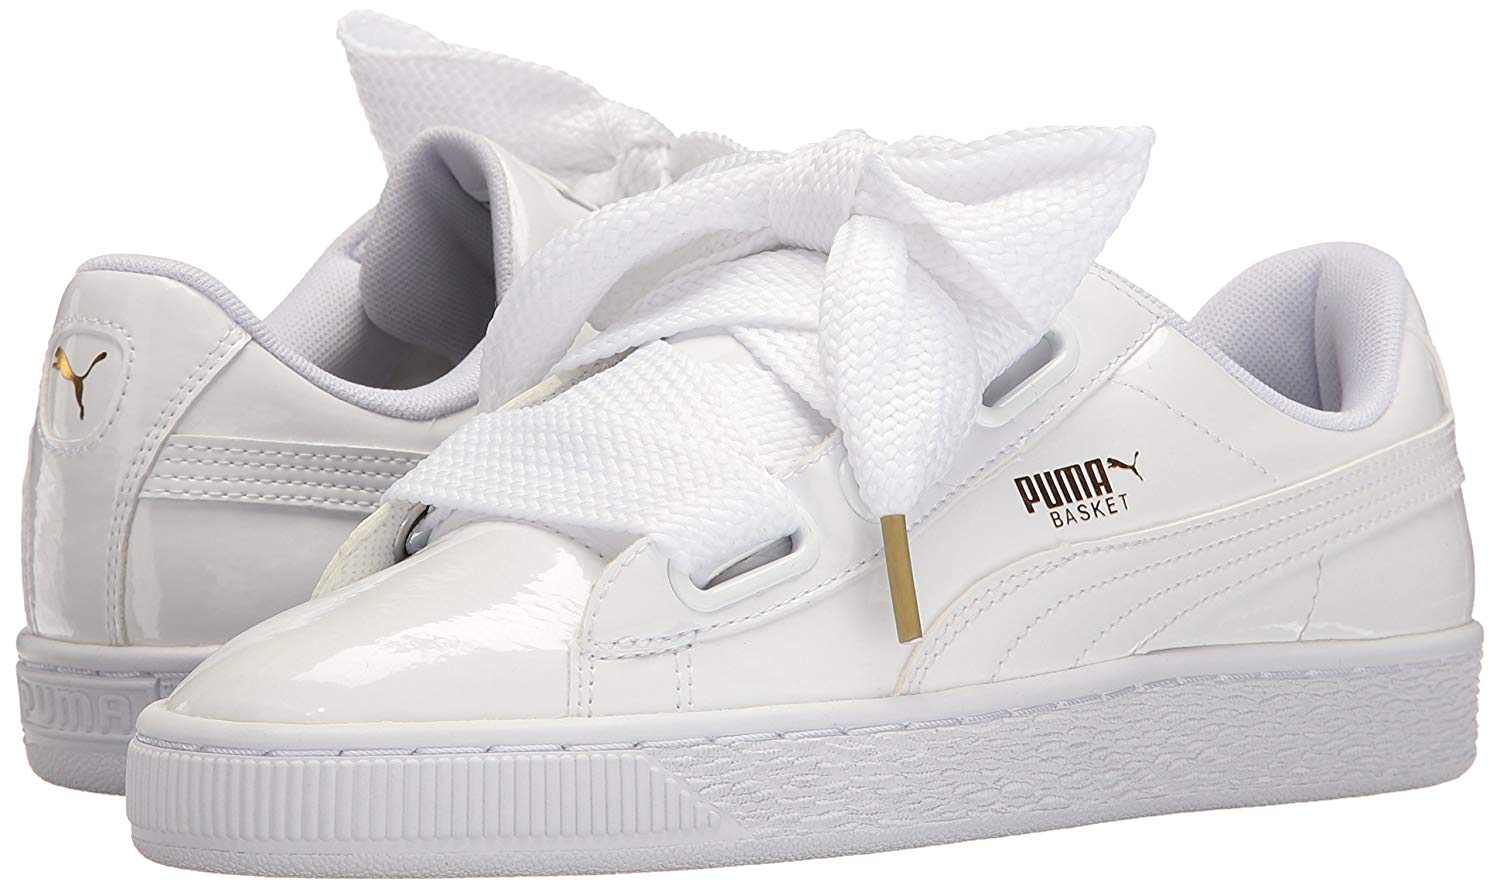 Puma Basket Heart Reviewed for Style in 